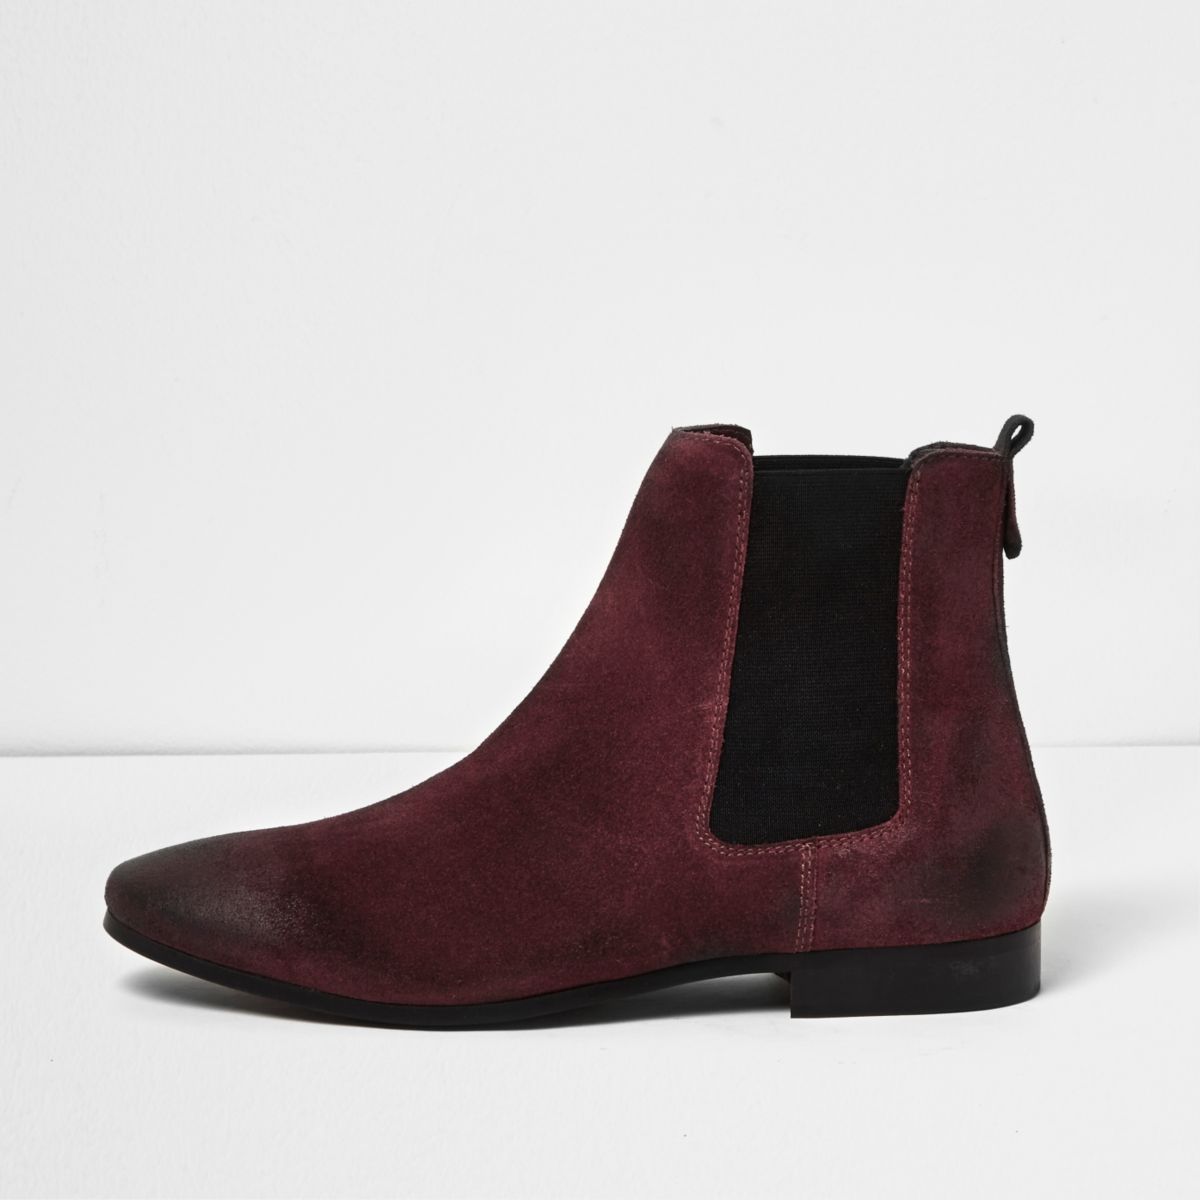 Burgundy suede tall Chelsea boots - Boots - Shoes & Boots - men